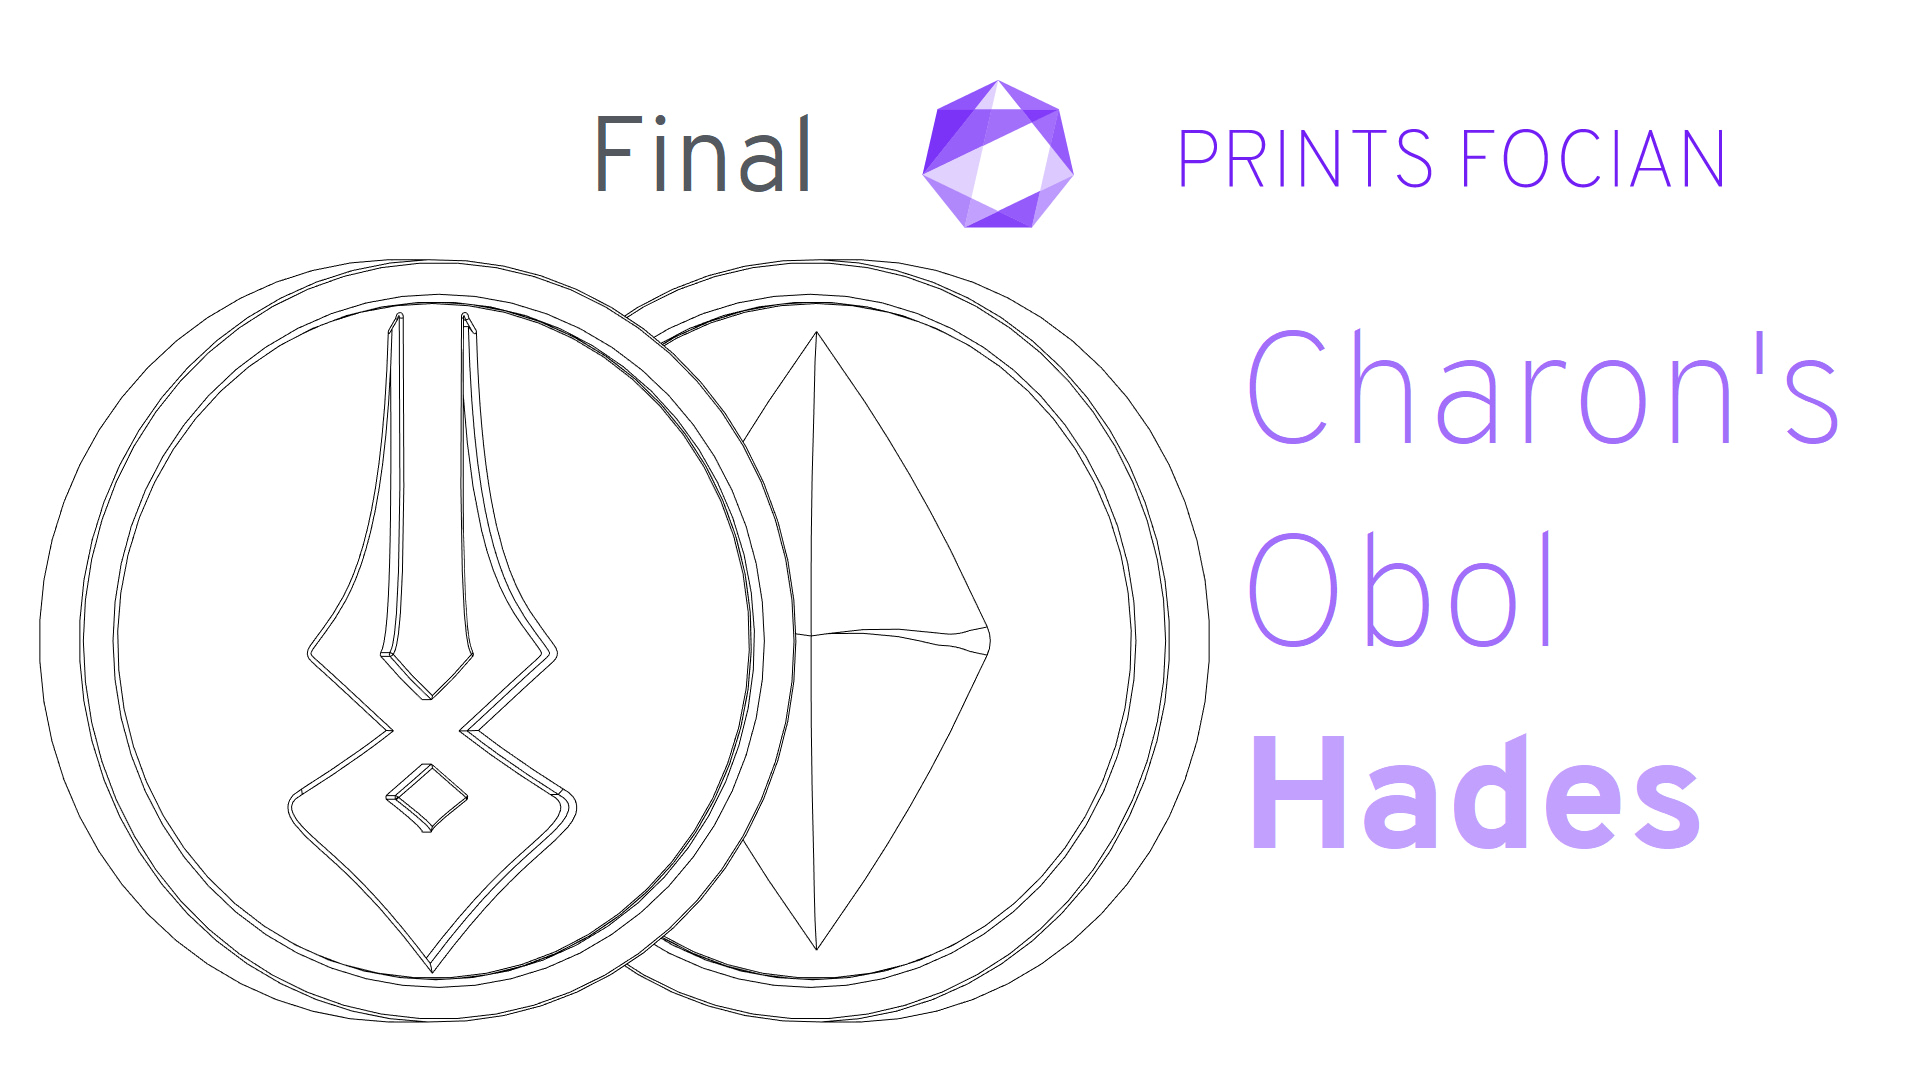 Wireframe image of Charon's Obol on a white background. Prints Focian Icon top and central. Text: Purple Prints Focian, Charon's Obol, and Hades. Dark grey text Final